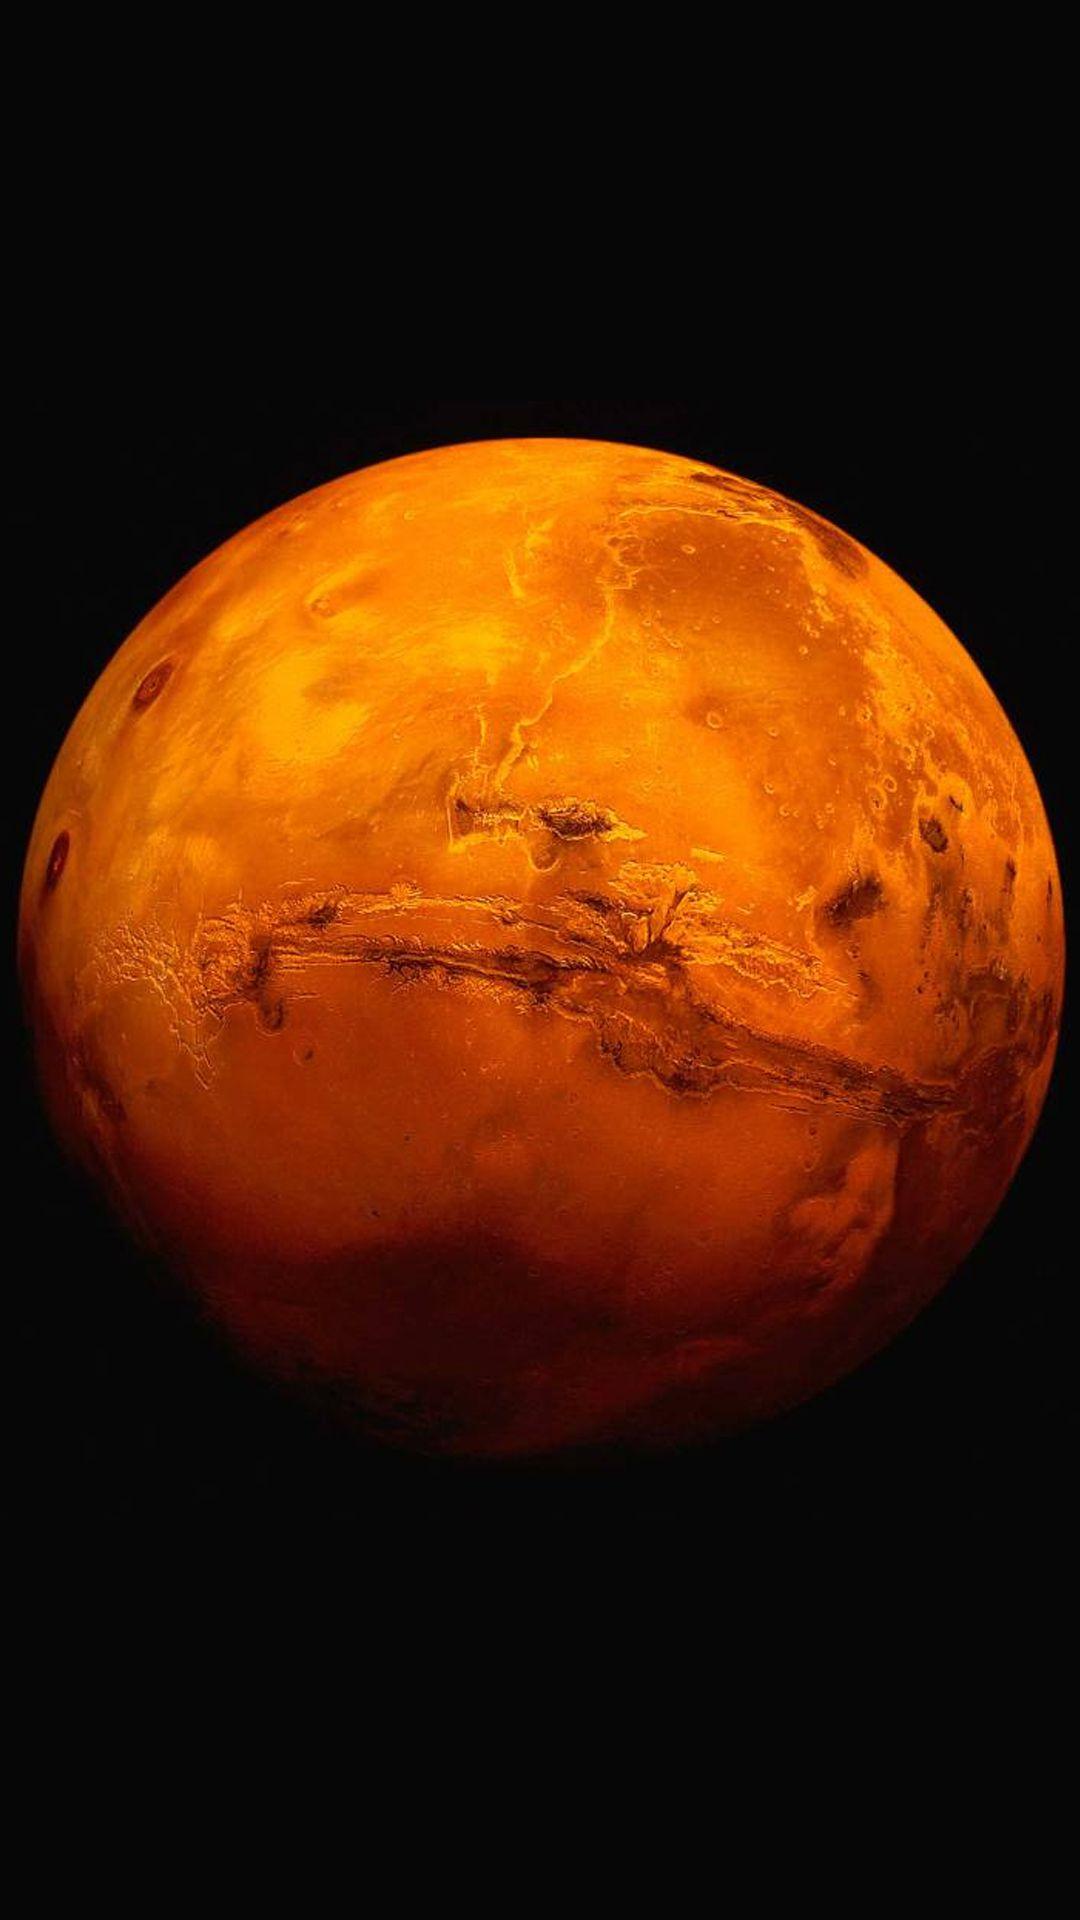 Mars Planet Full View iPhone HD Wallpaper. Space